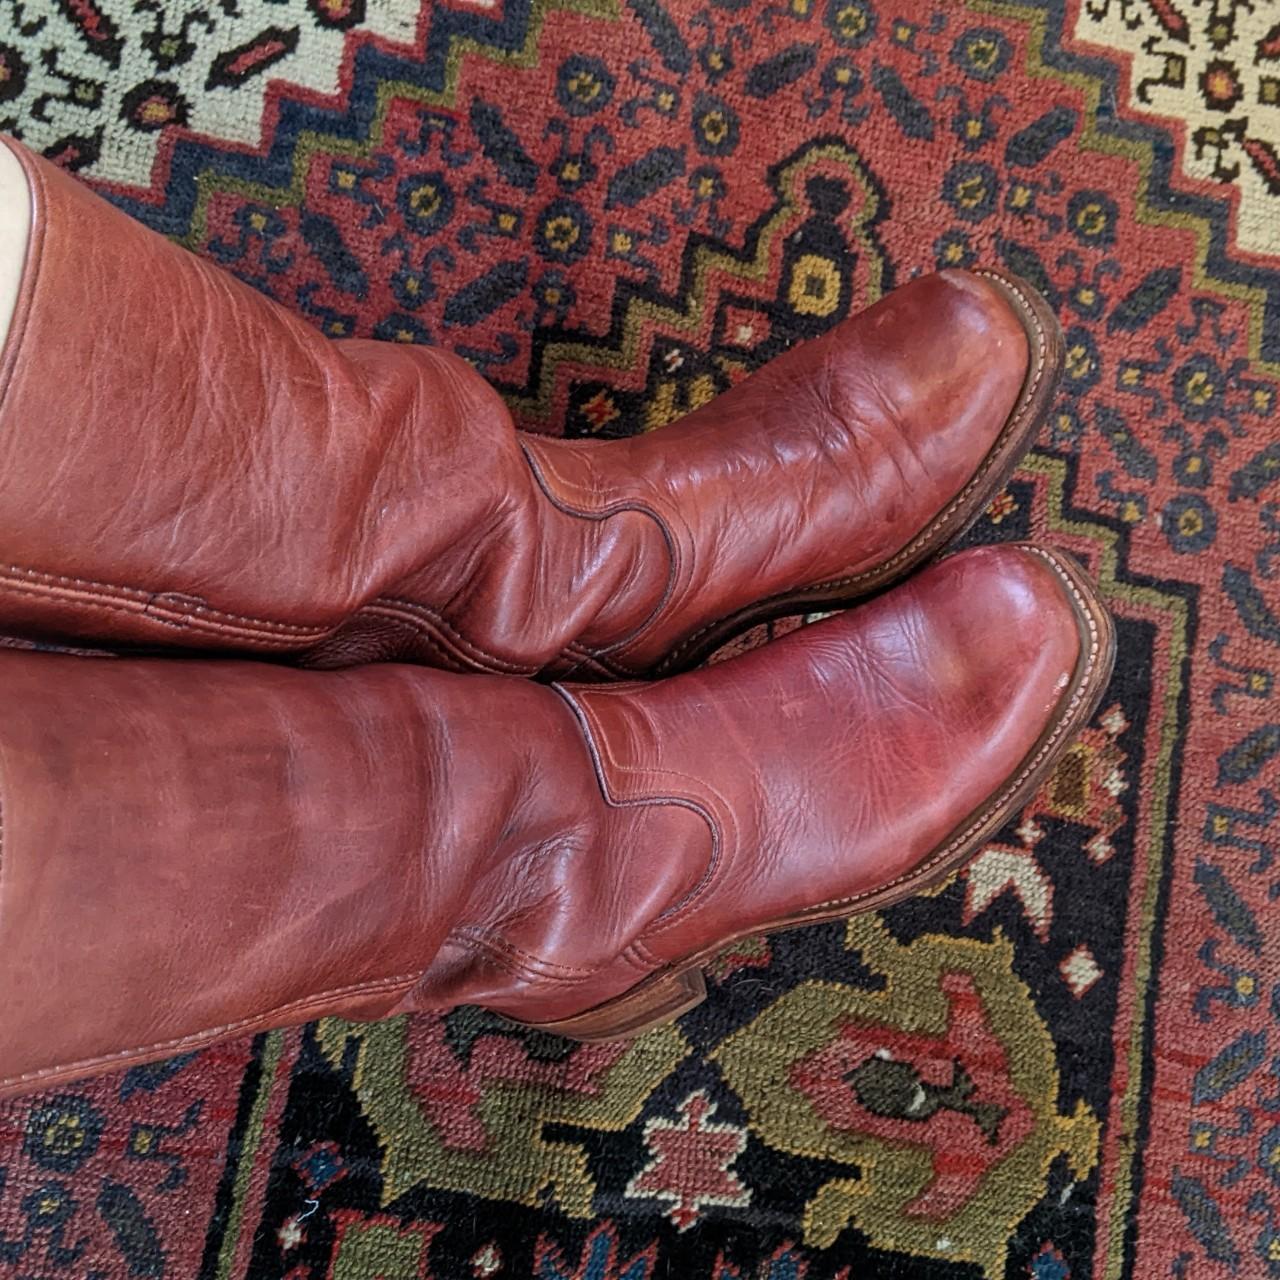 Frye Women's Red and Burgundy Boots